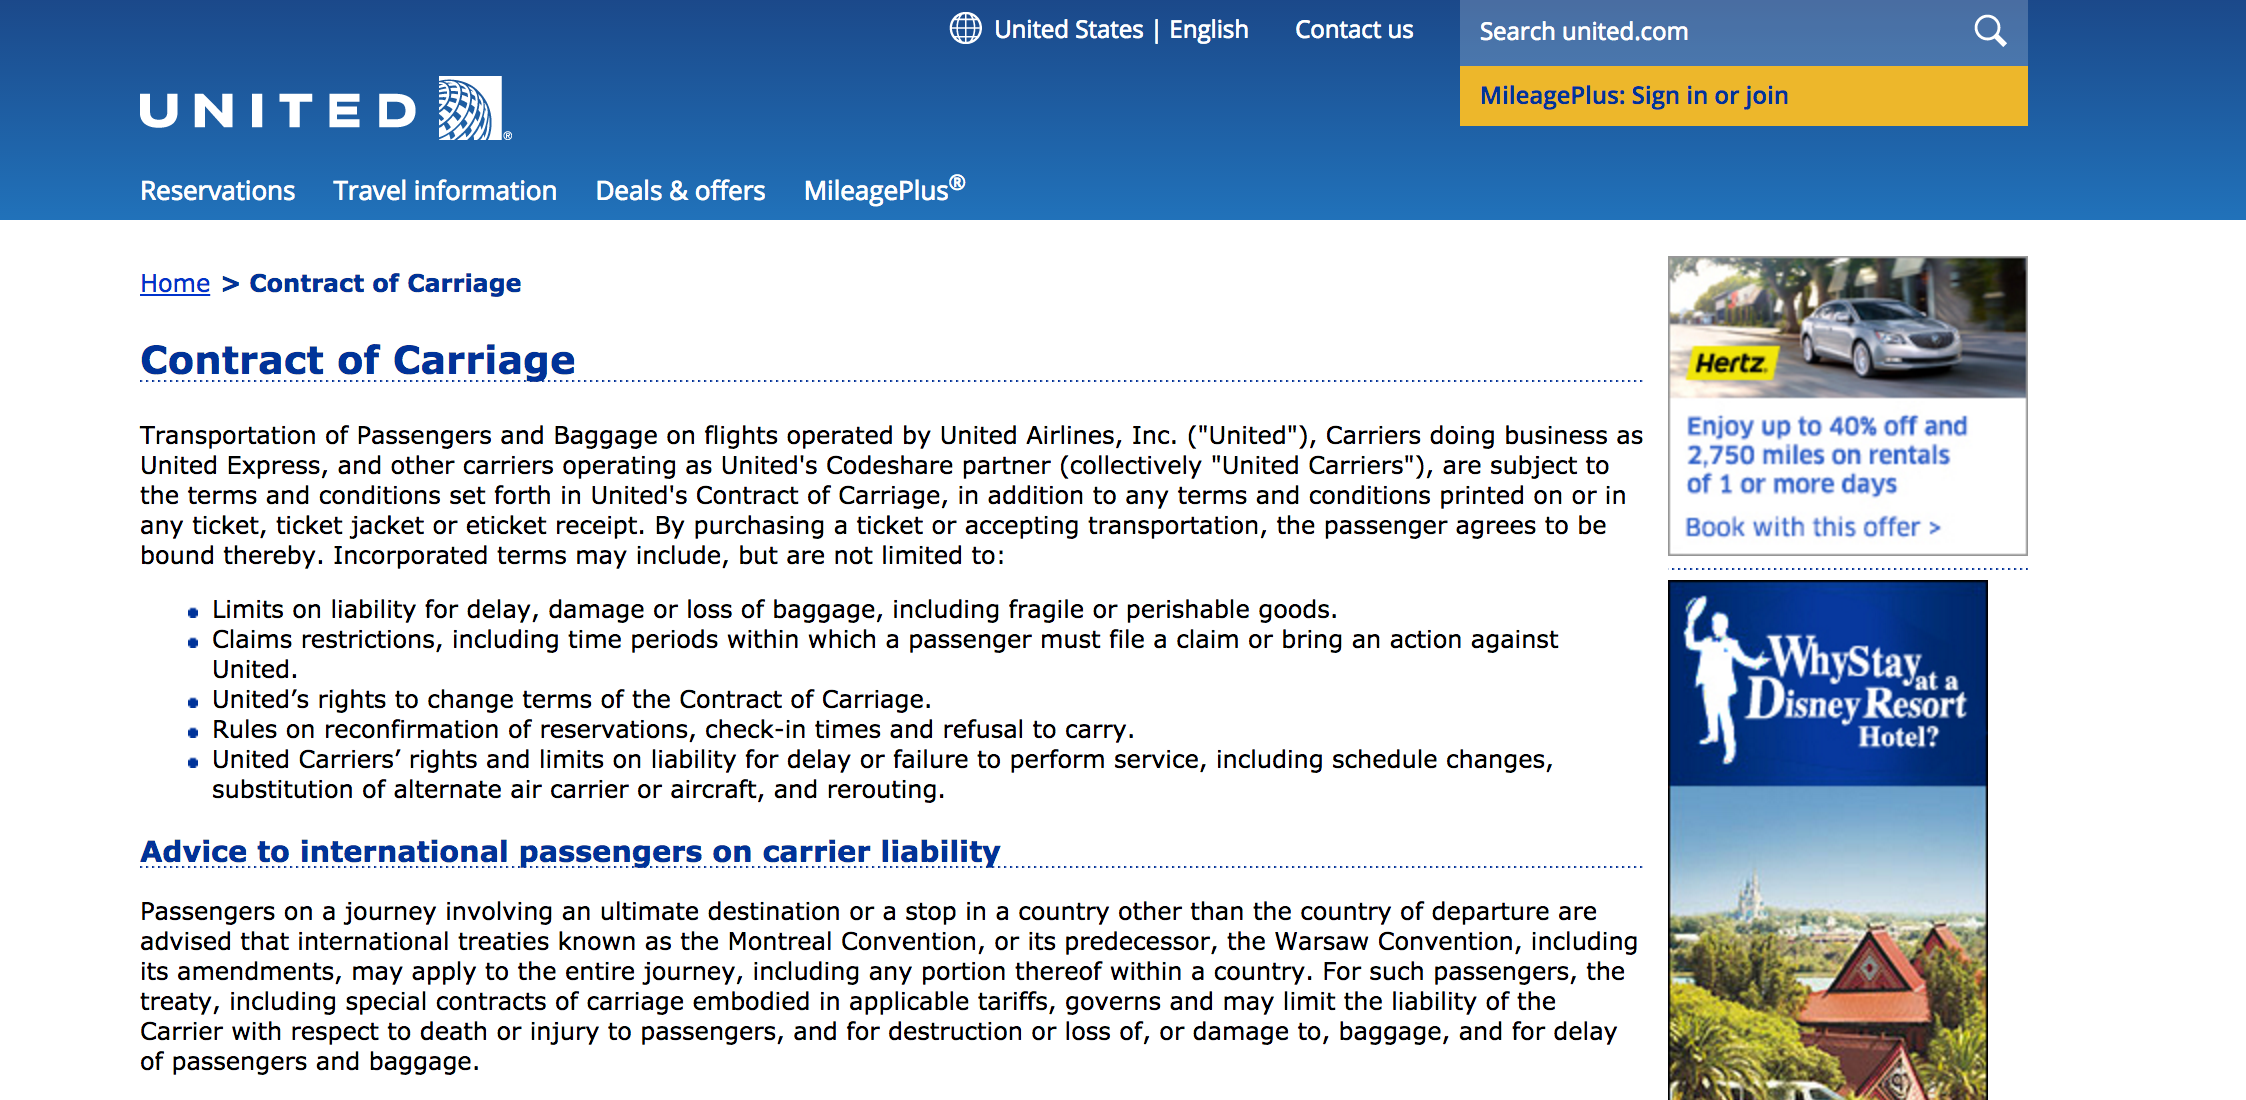 United Airlines Contract of Carriage, click image for full contract. (Image: United.com)